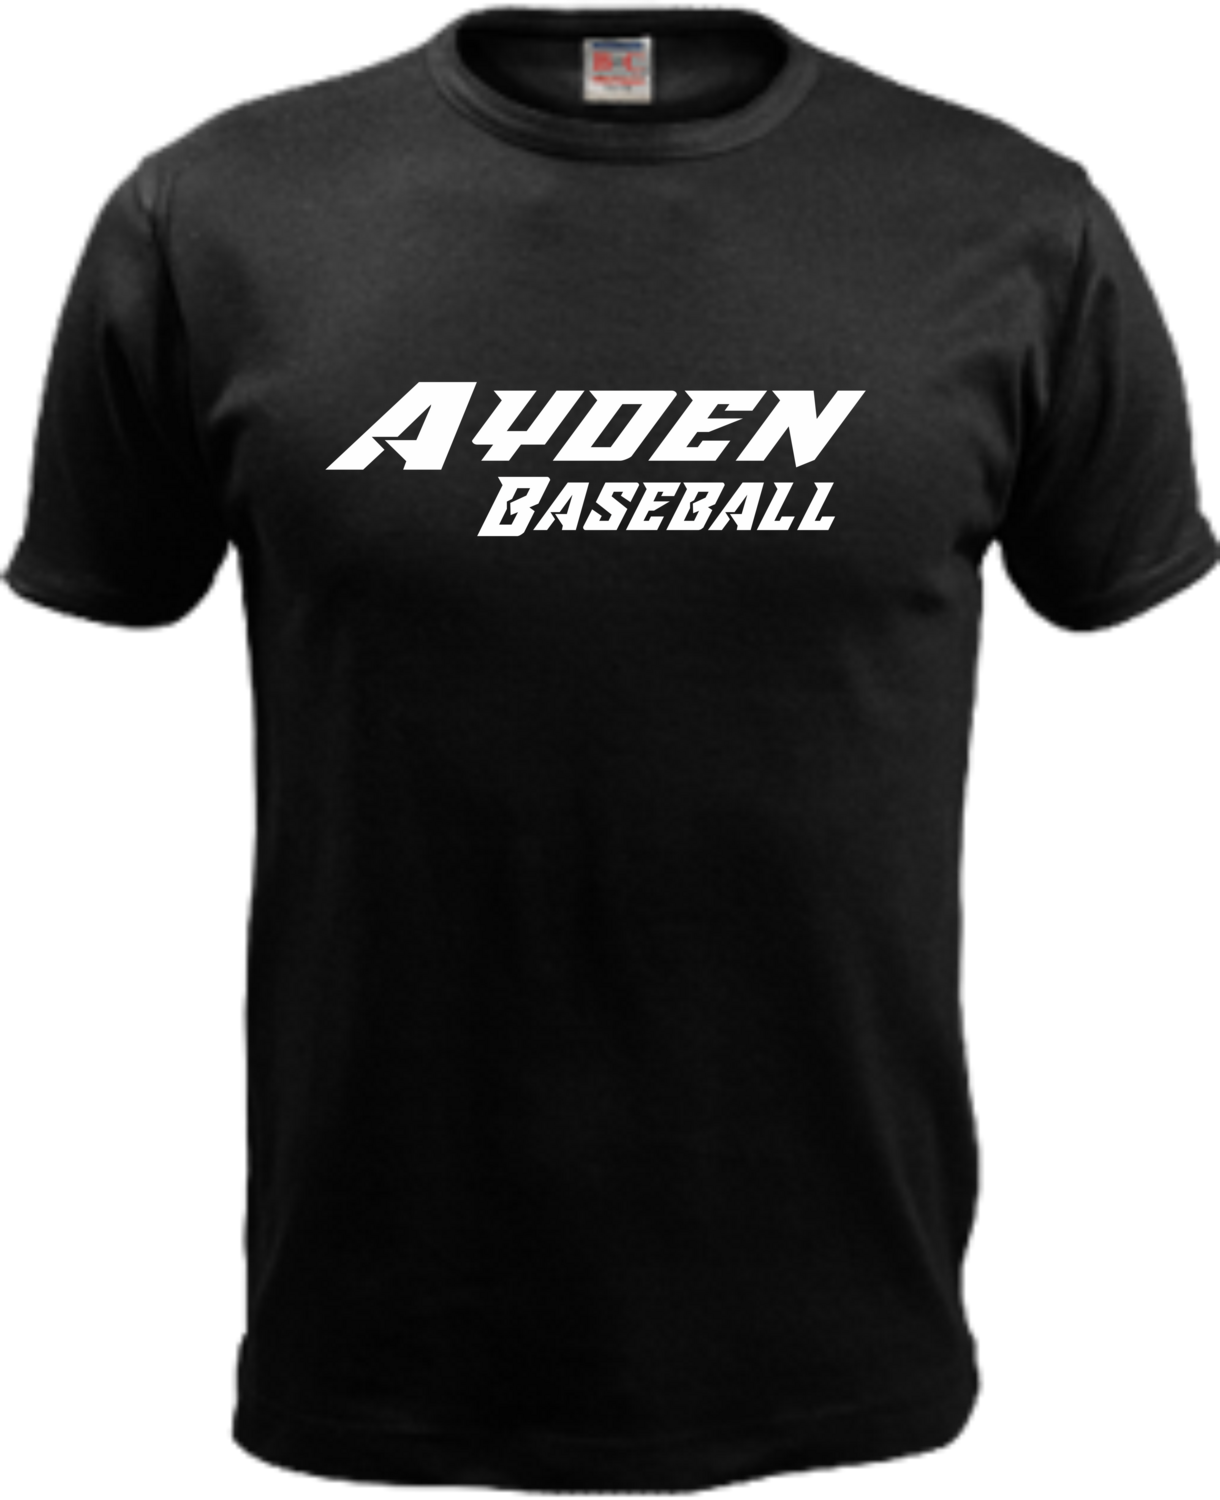 Black Short-Sleeved Cotton T-shirt - Adult & Youth - Add Player Name & Number on Back (Optional)